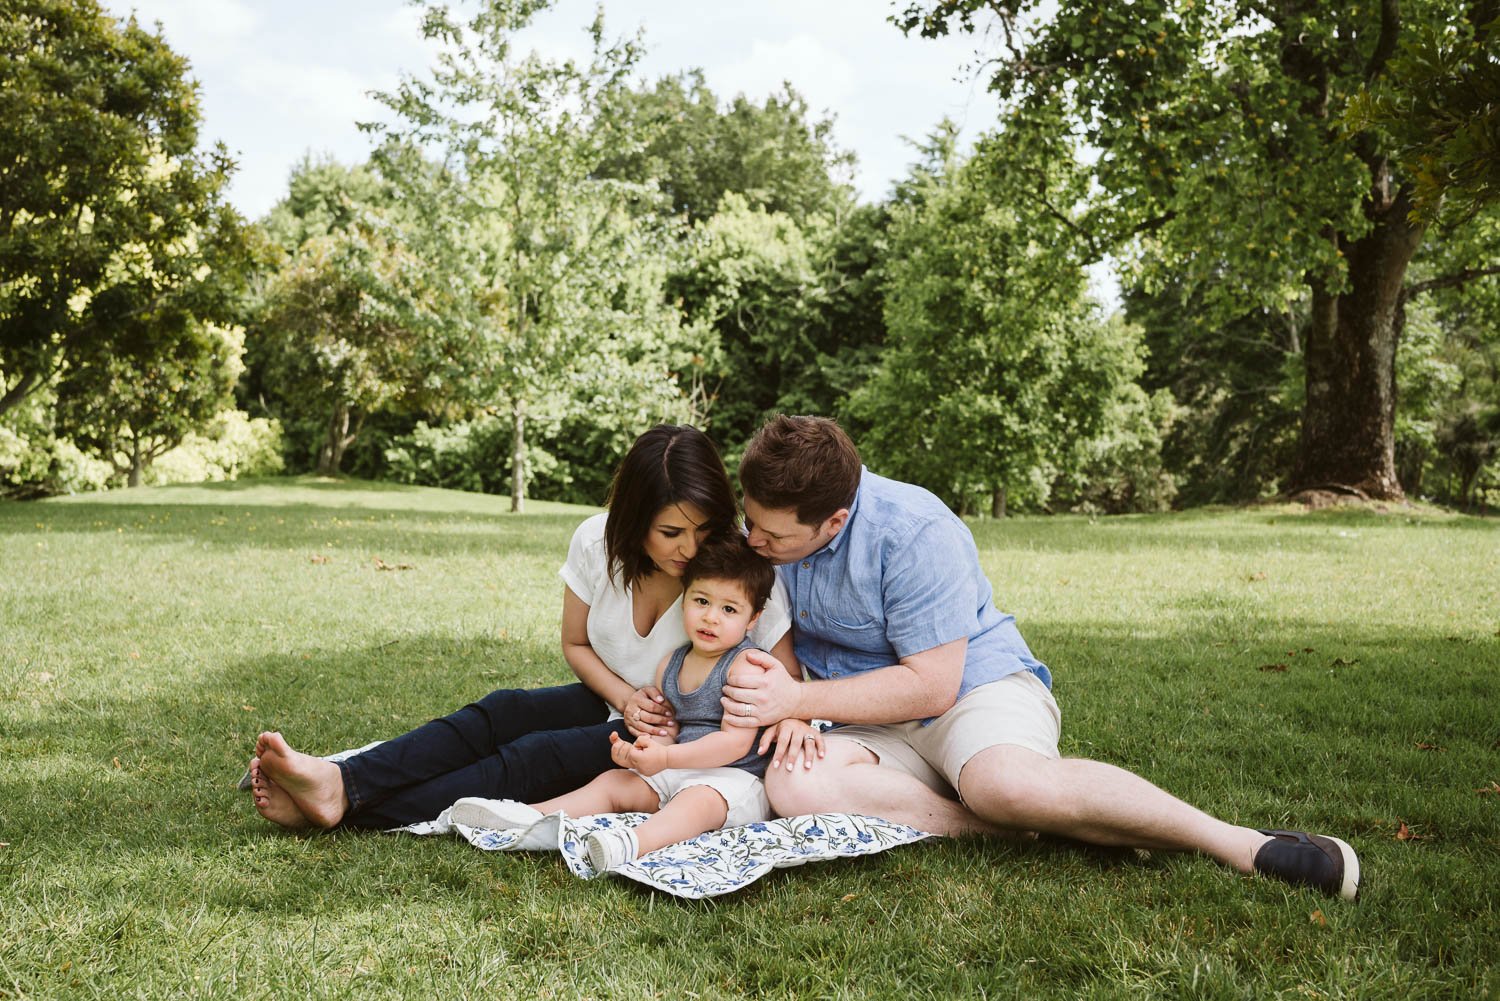 Family Photo Shoot Locations in Auckland - Cornwall Park grass_.jpg